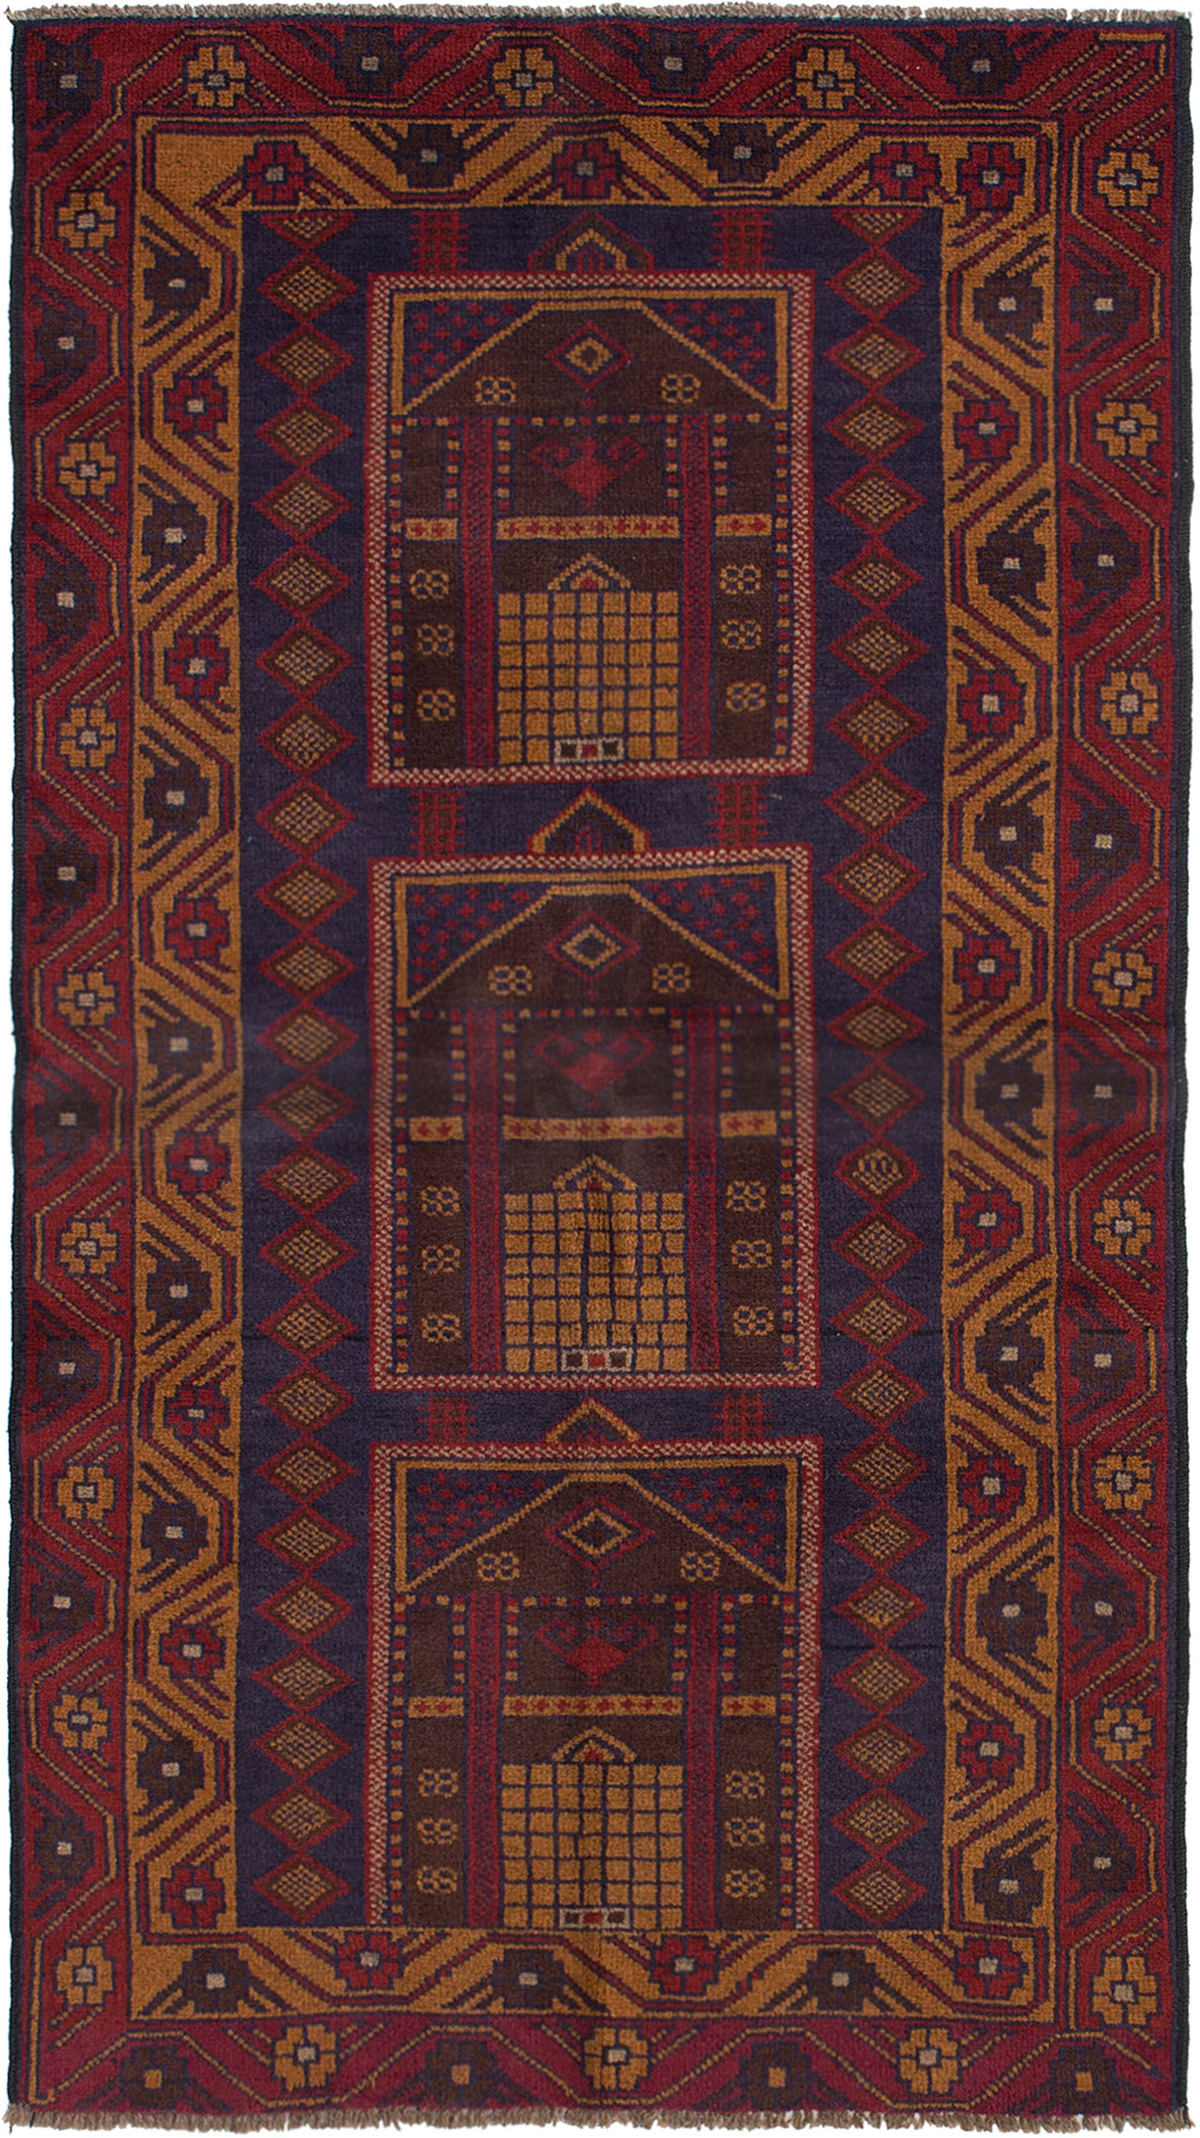 Hand-knotted Teimani Red Wool Rug 3'10" x 6'5" Size: 3'10" x 6'5"  